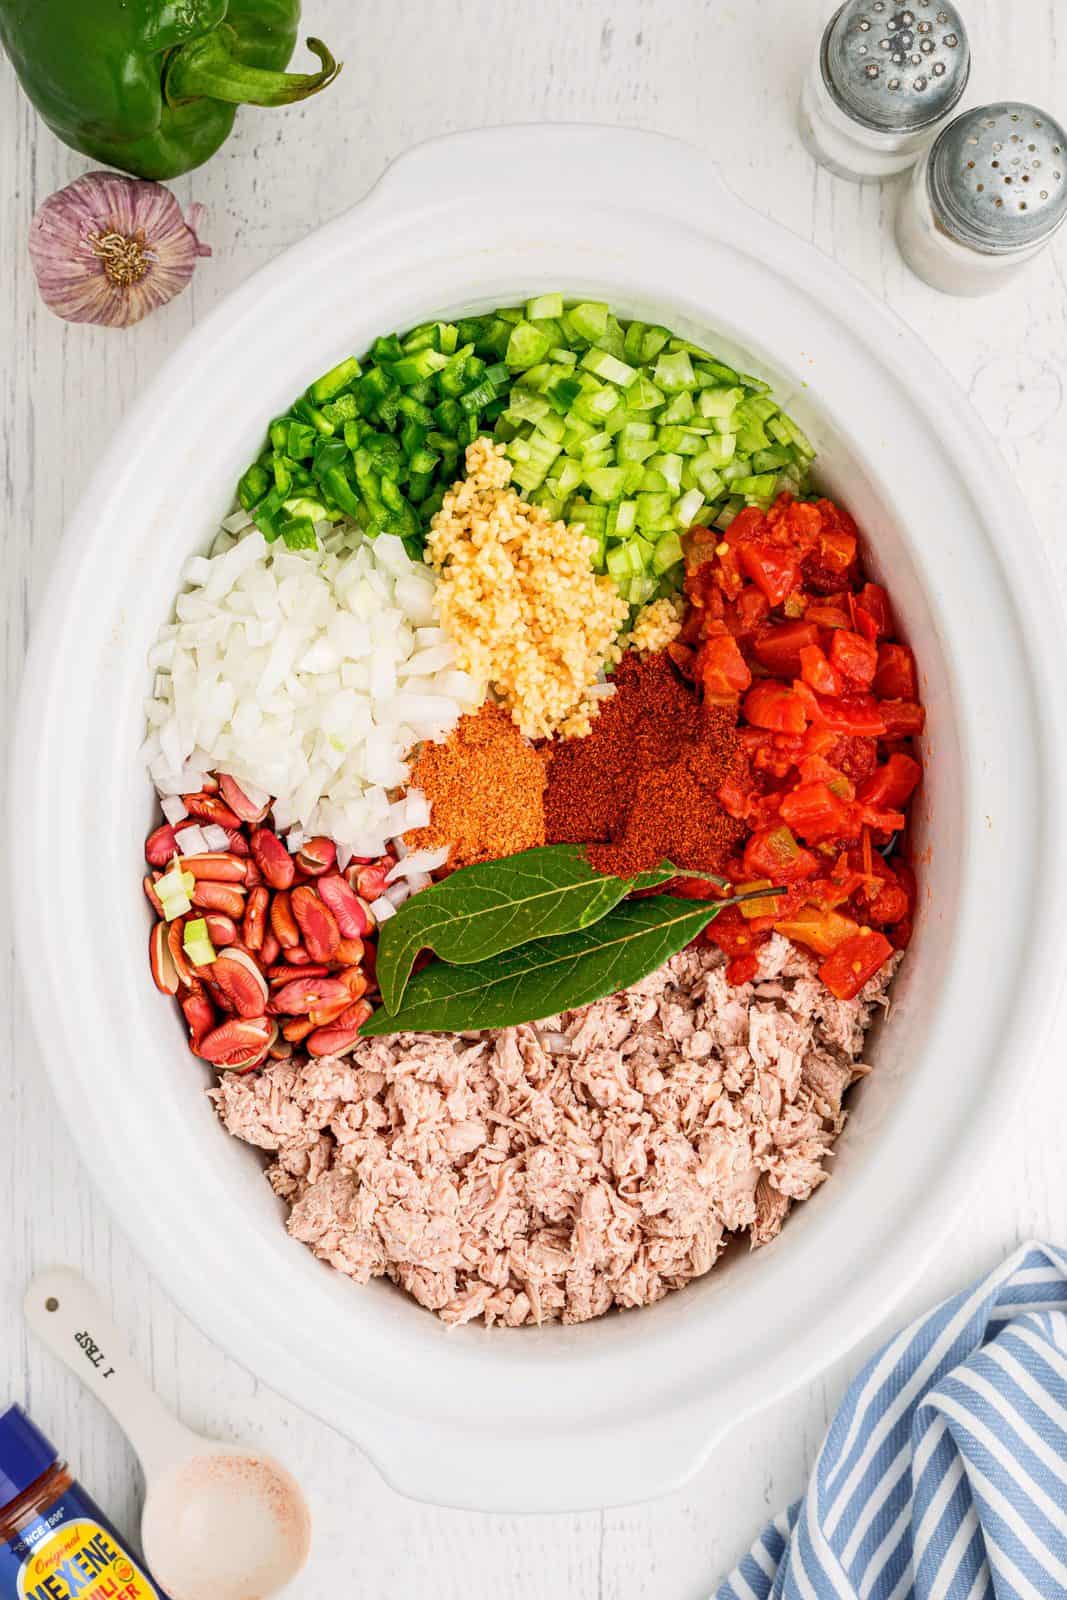 All ingredients added to an oval white crock pot.